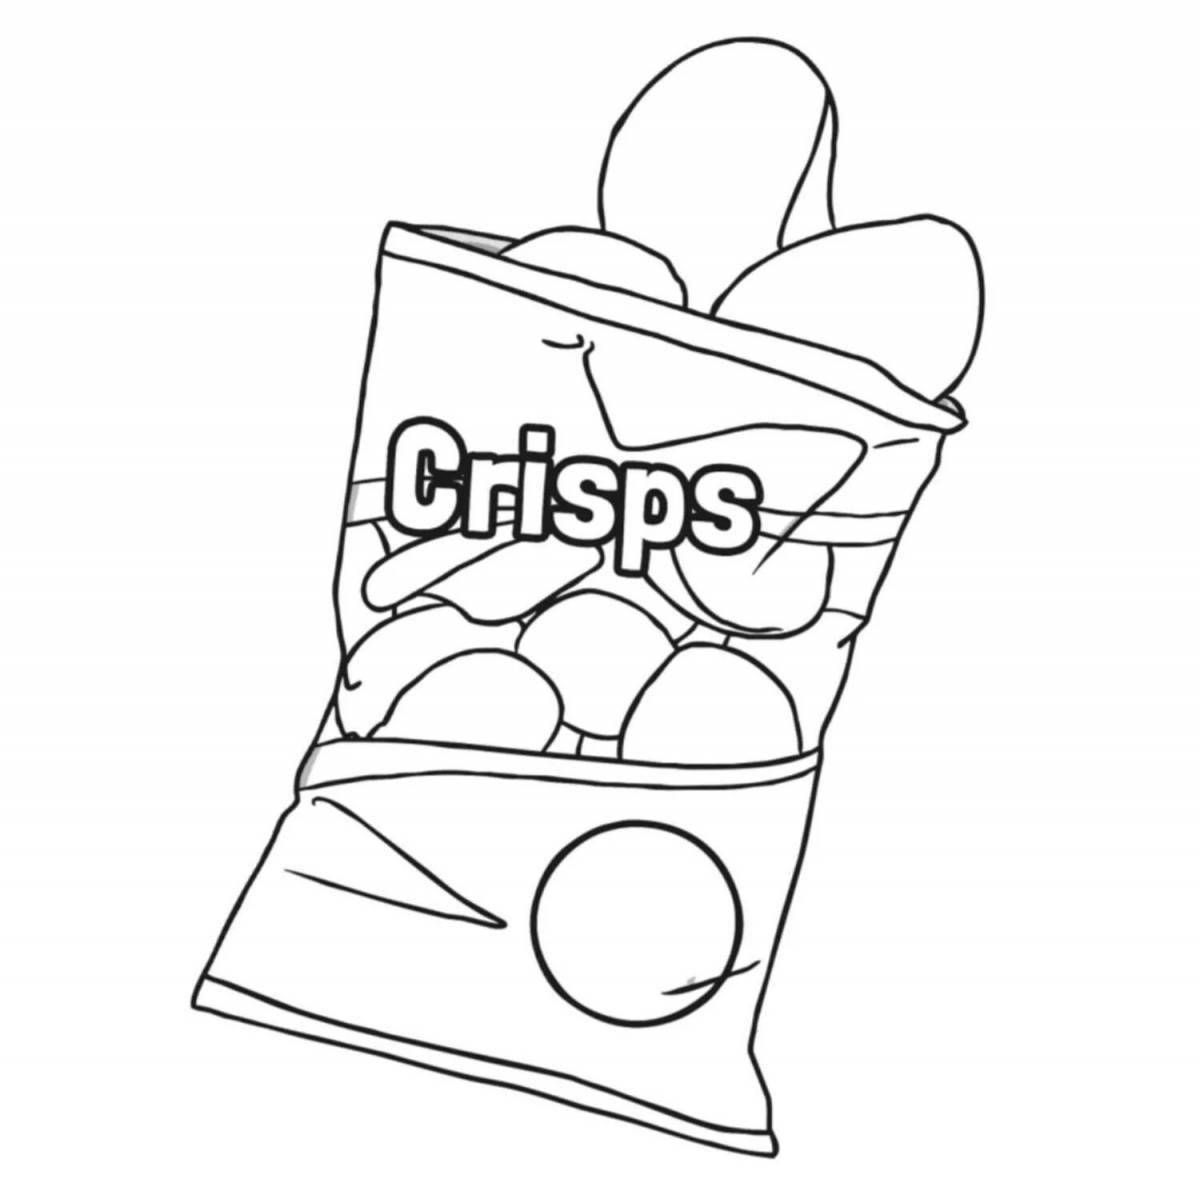 Nice pack of crisps coloring book